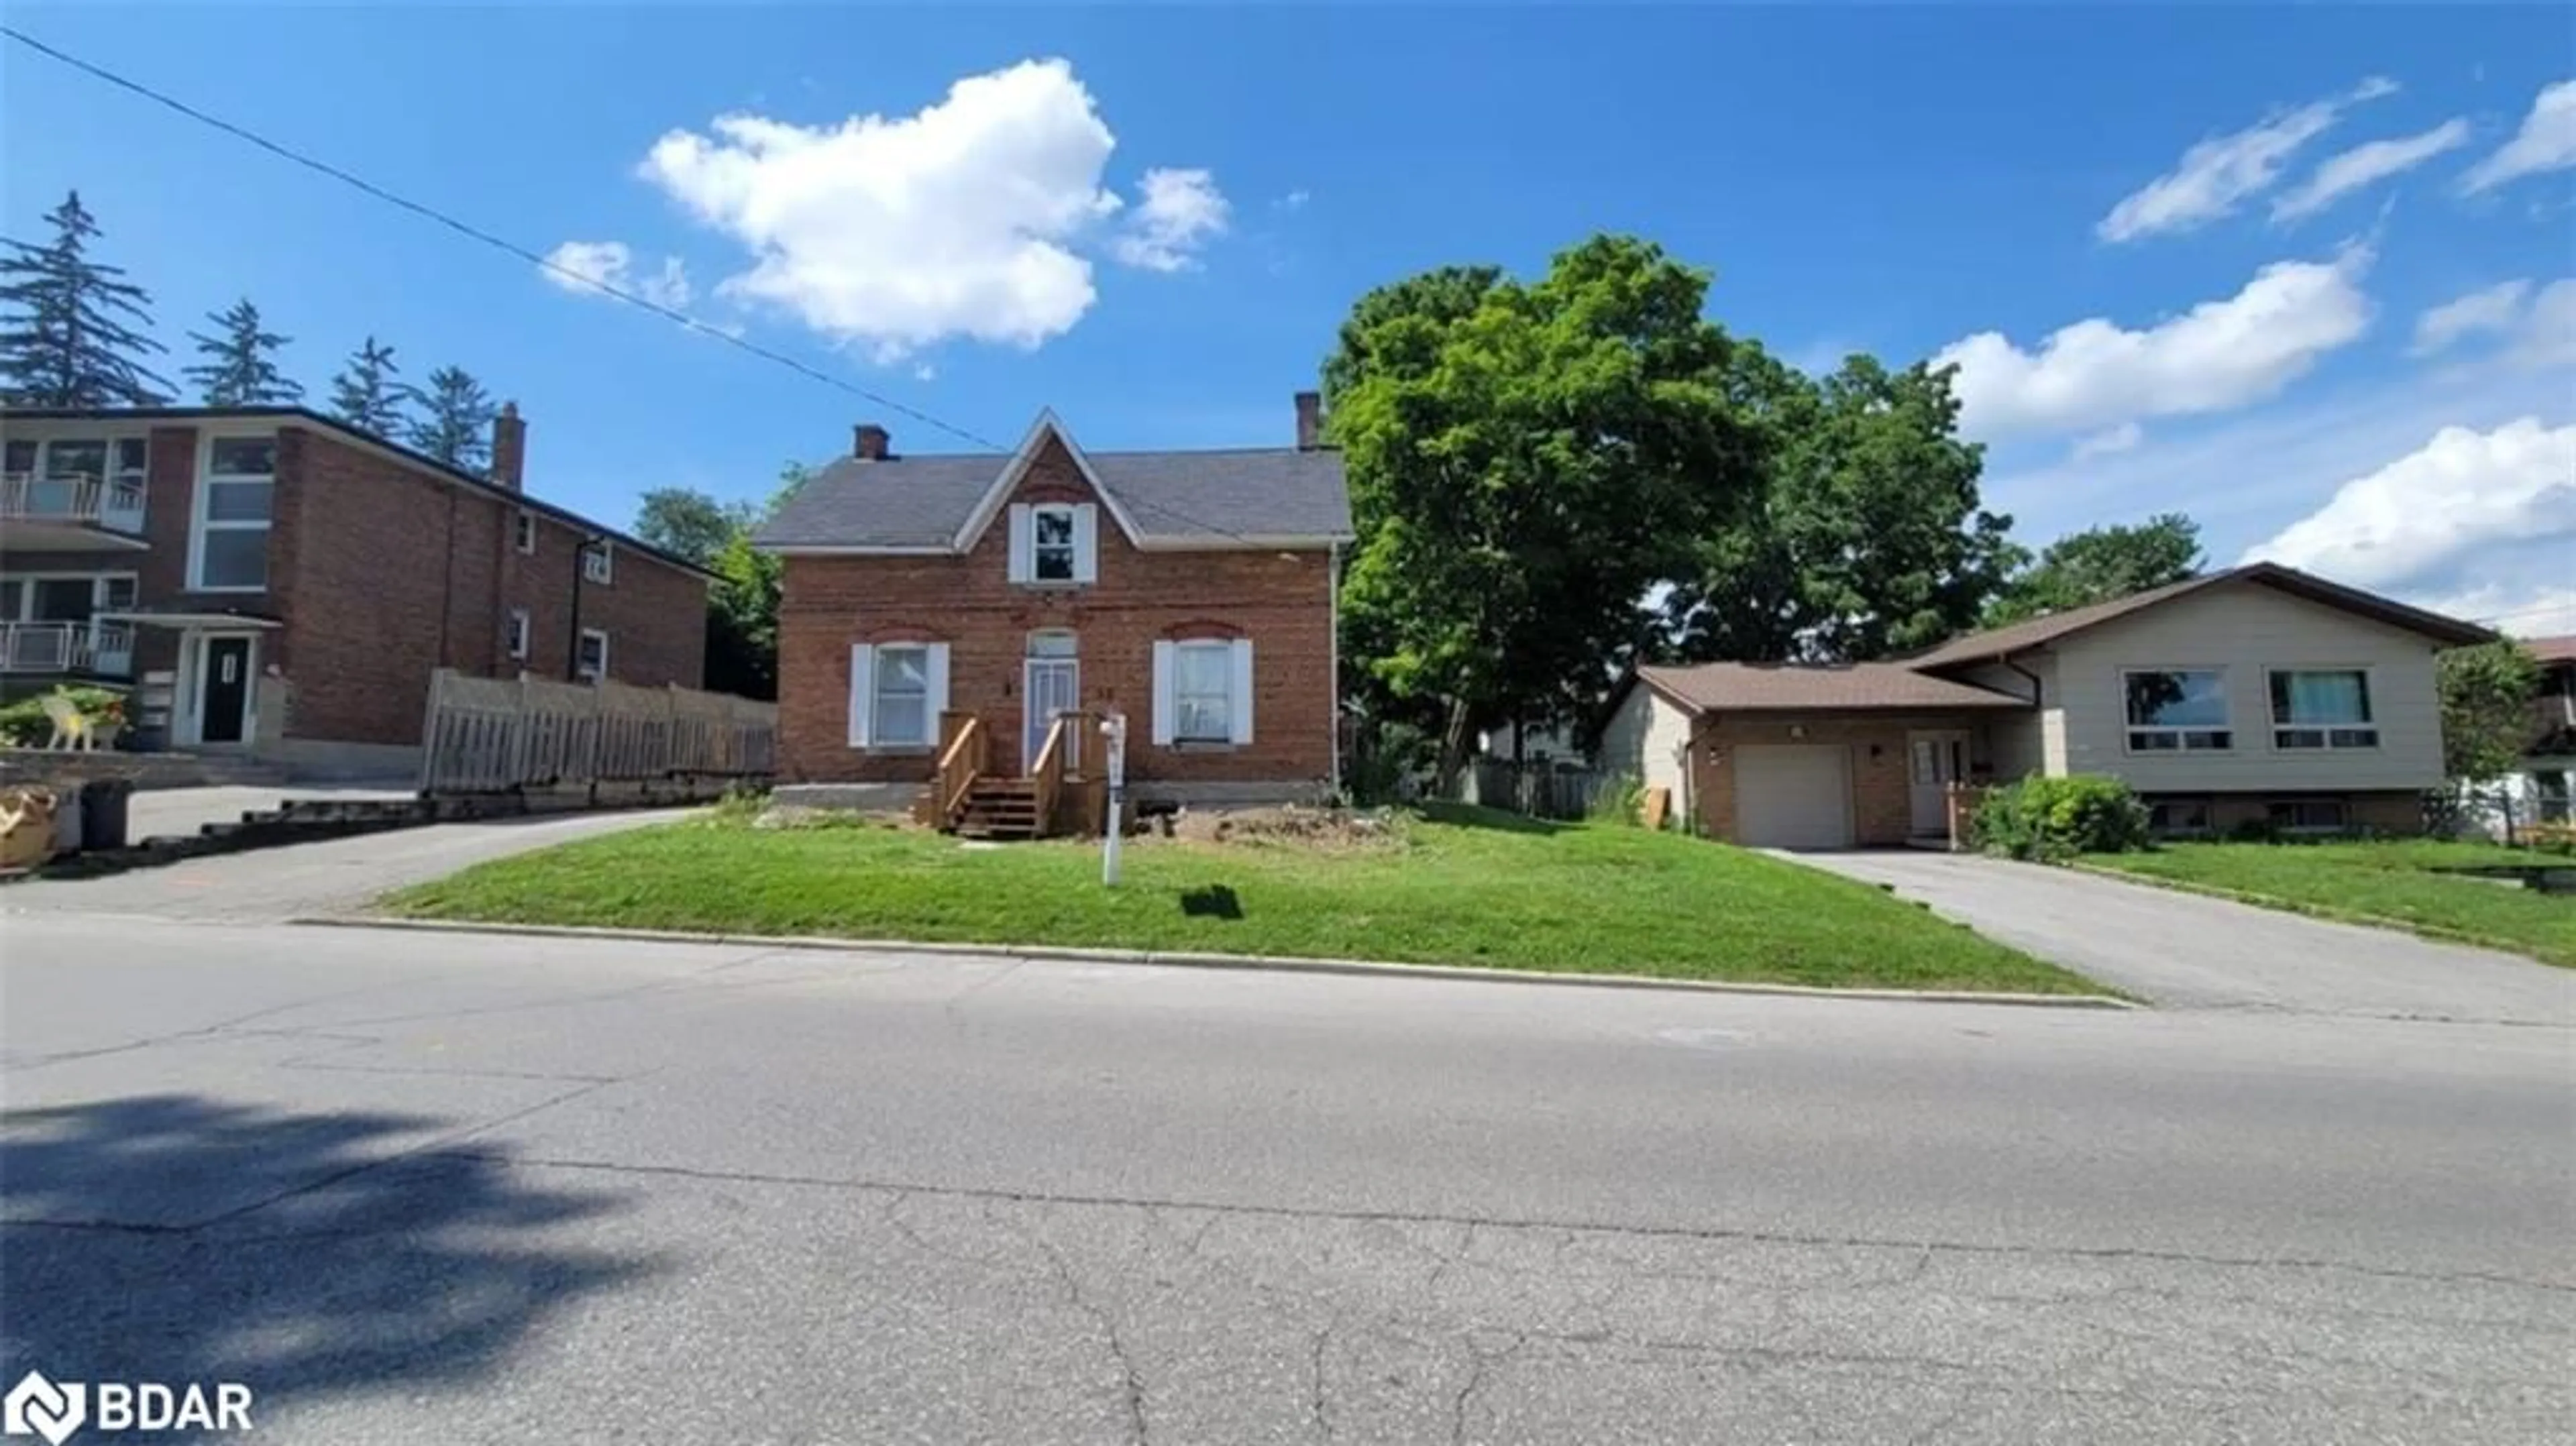 Street view for 48 Rose St, Barrie Ontario L4M 2T2